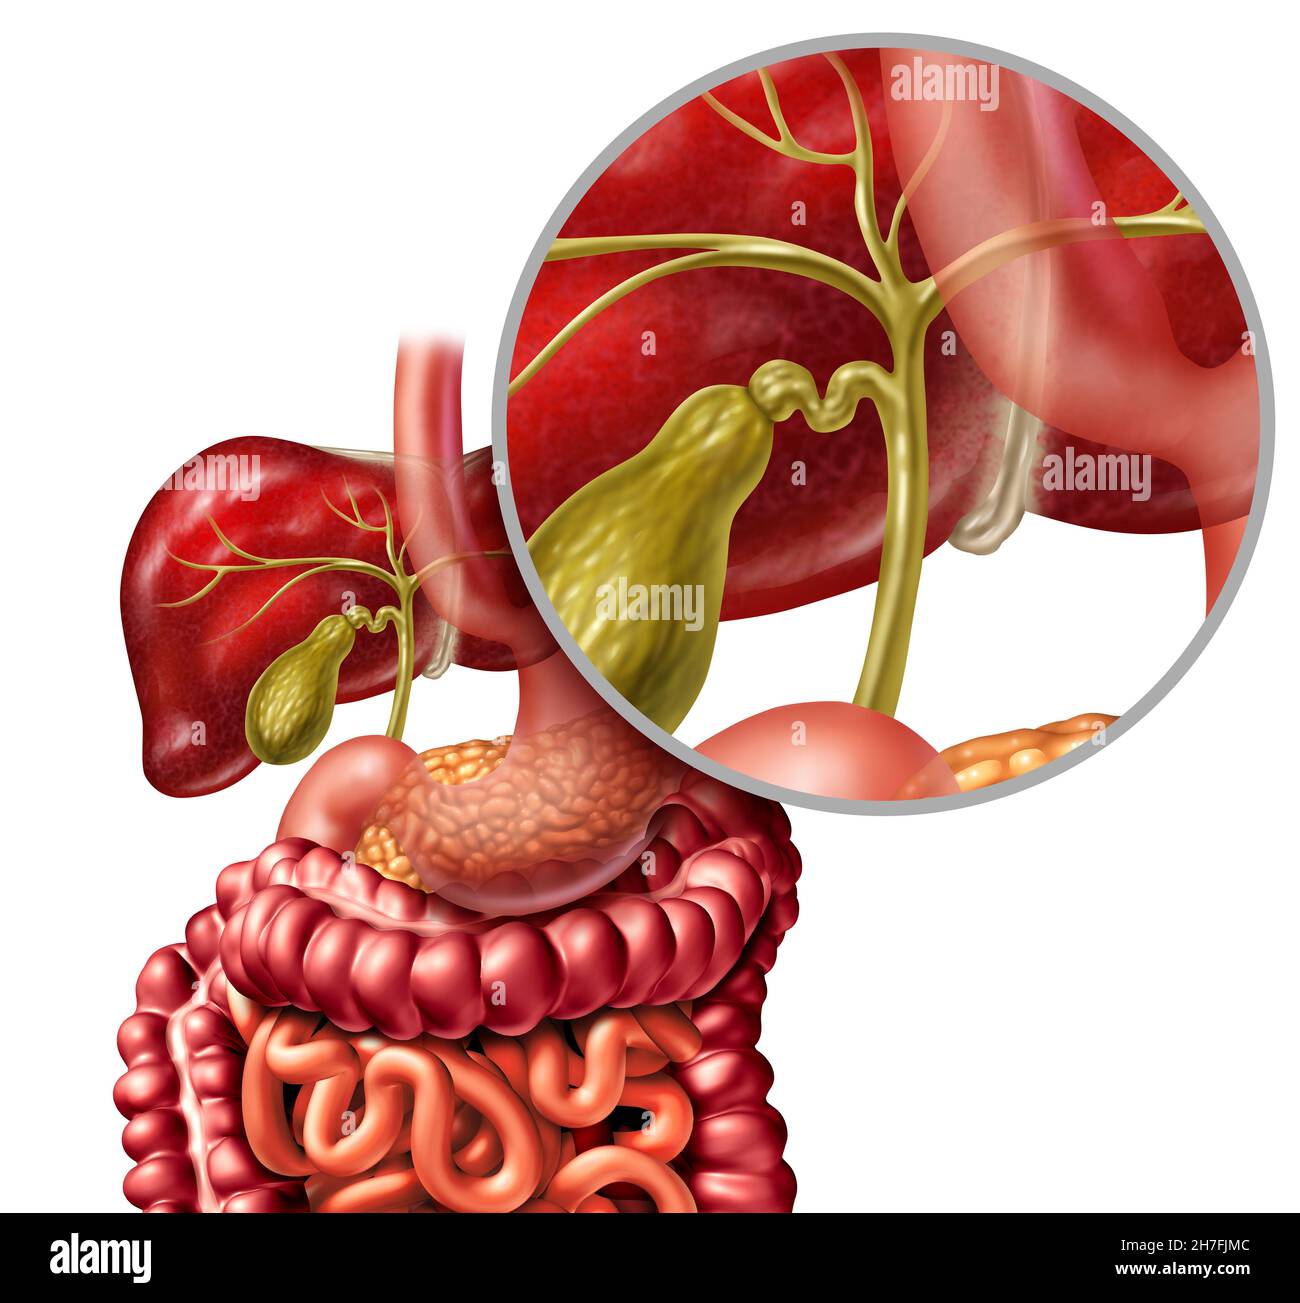 Healthy Bile duct concept with a gall bladder and liver as a medical illustration of the digestive system representing a health care concept. Stock Photo